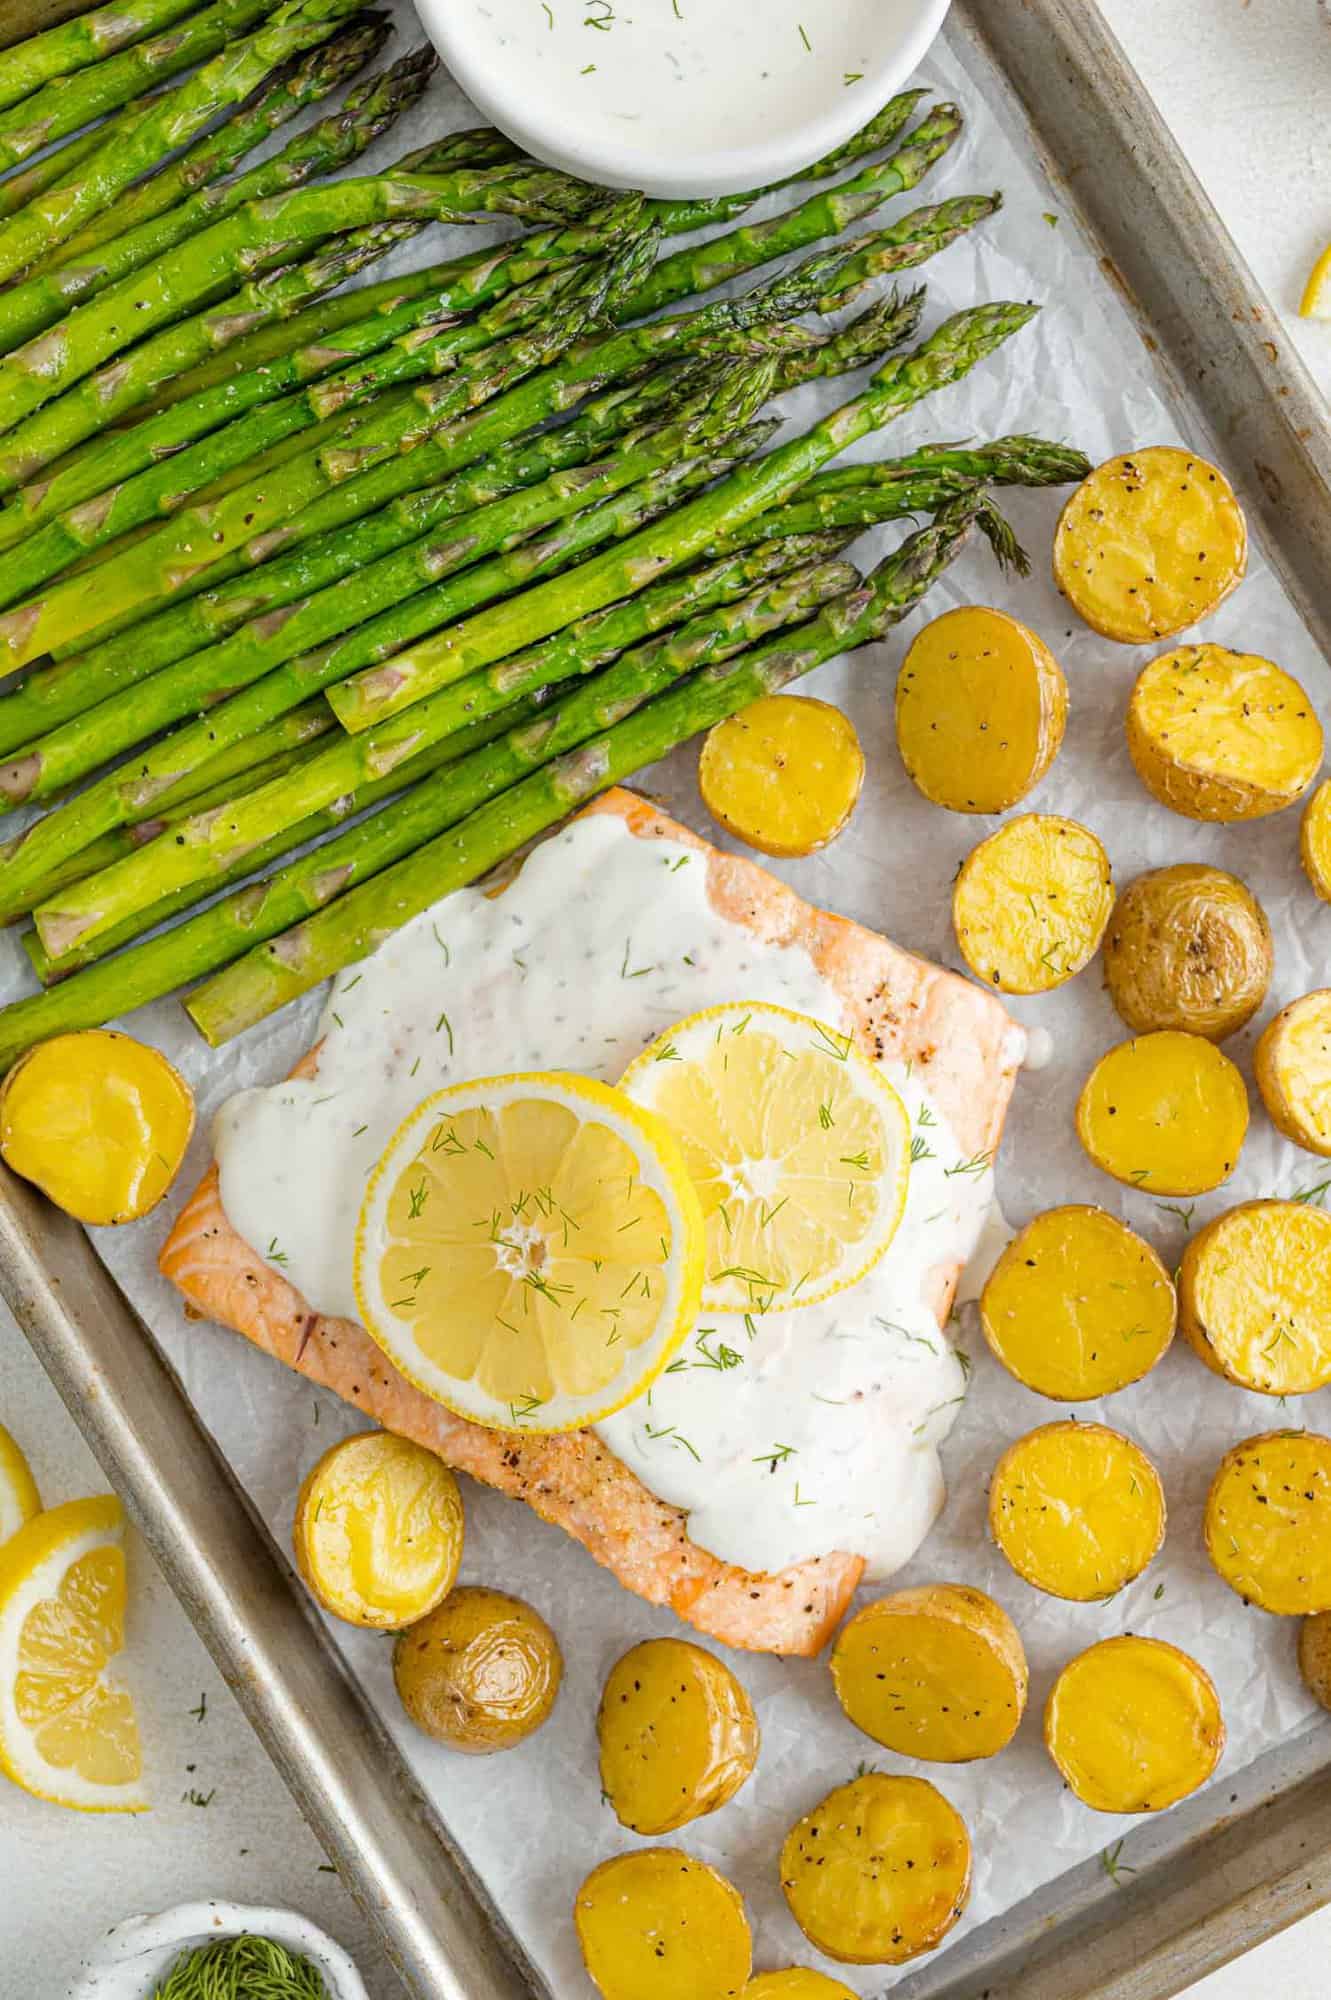 Salmon sheet pan dinner with asparagus and potatoes.